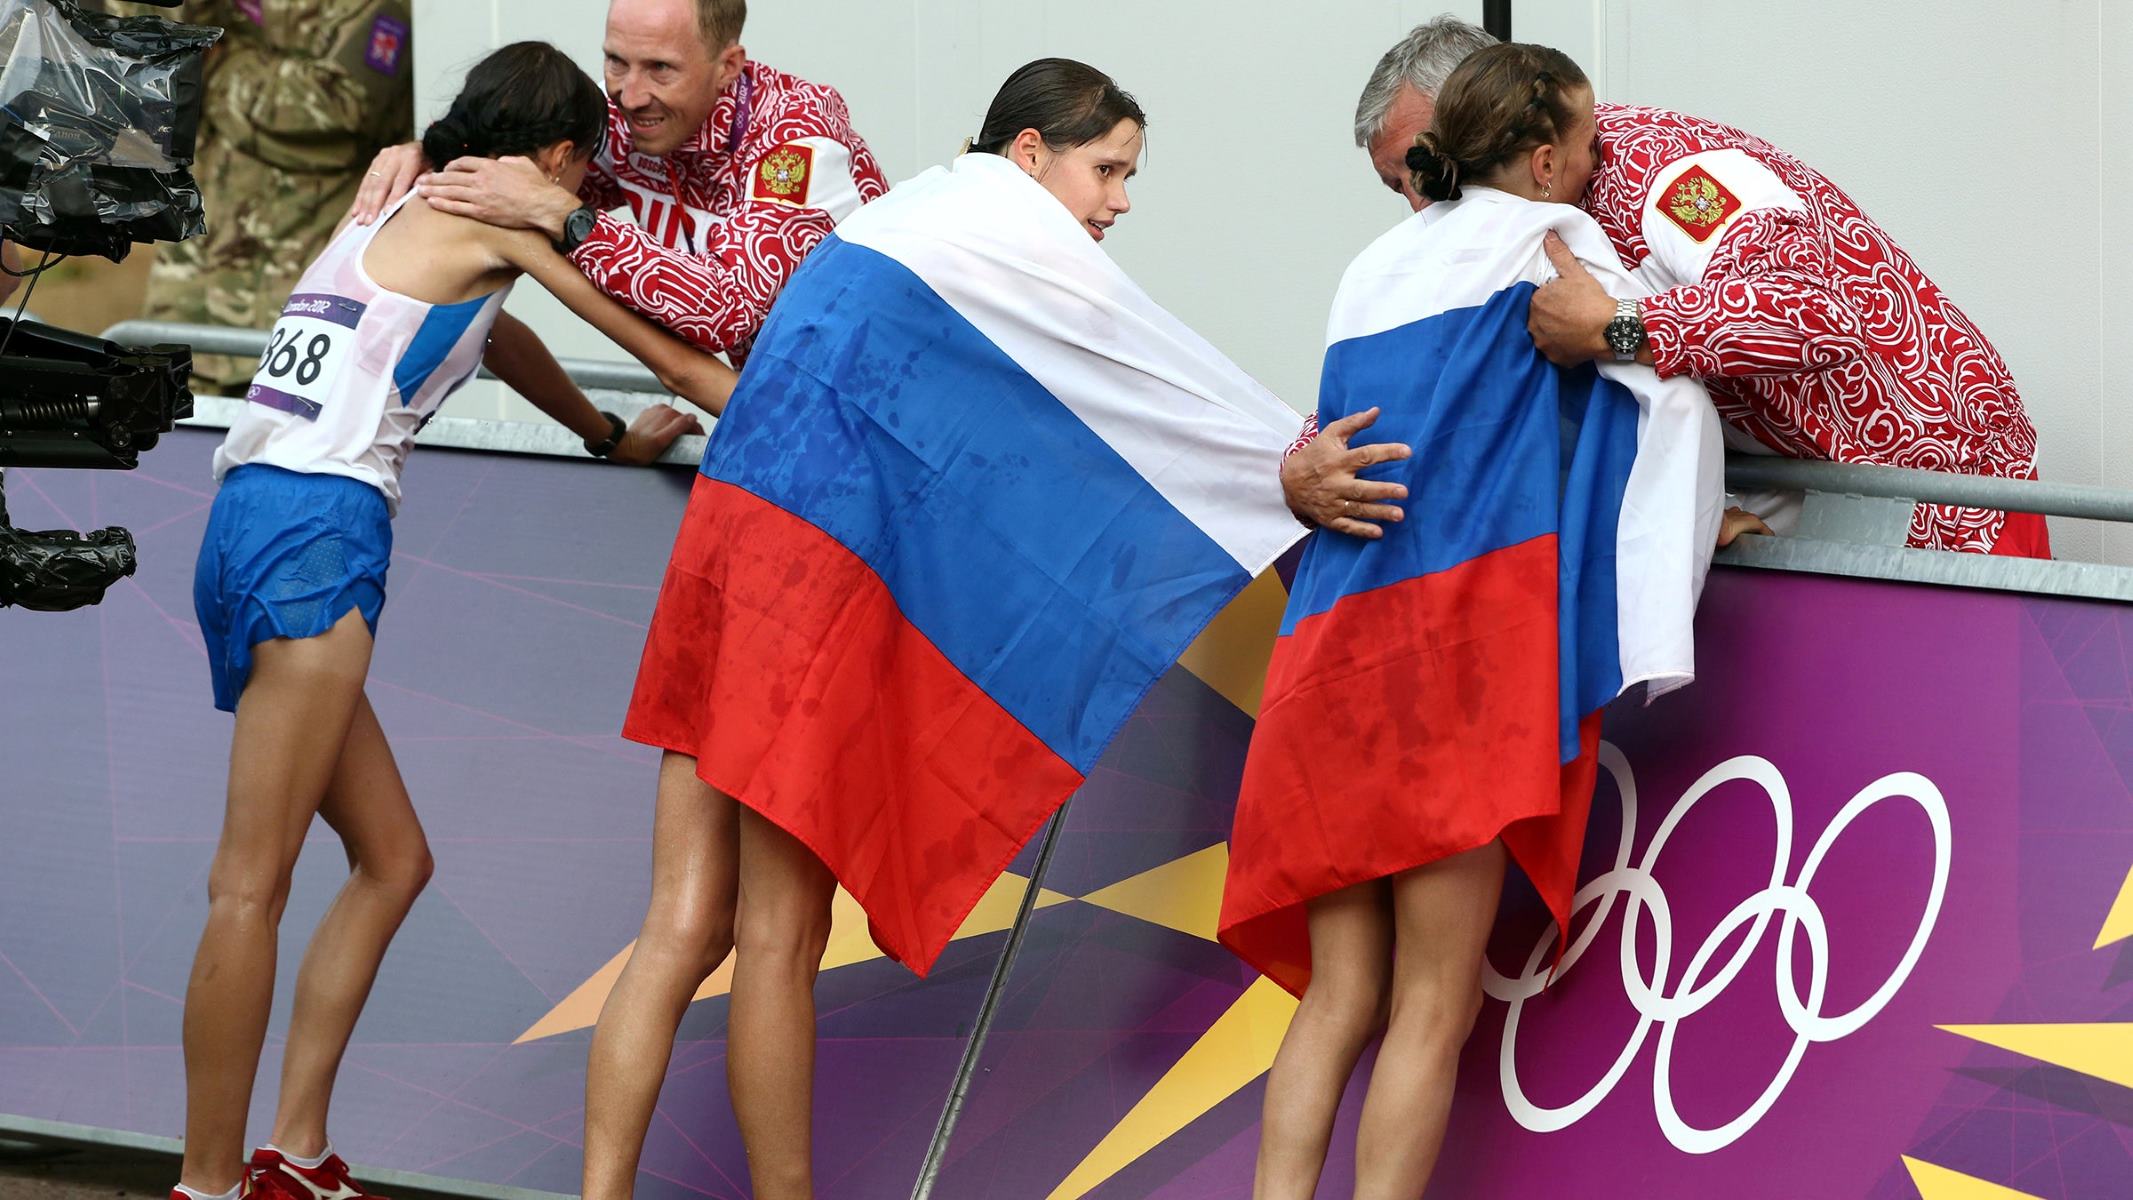 Why Was Russia’s Track And Field Banned From The Olympics?